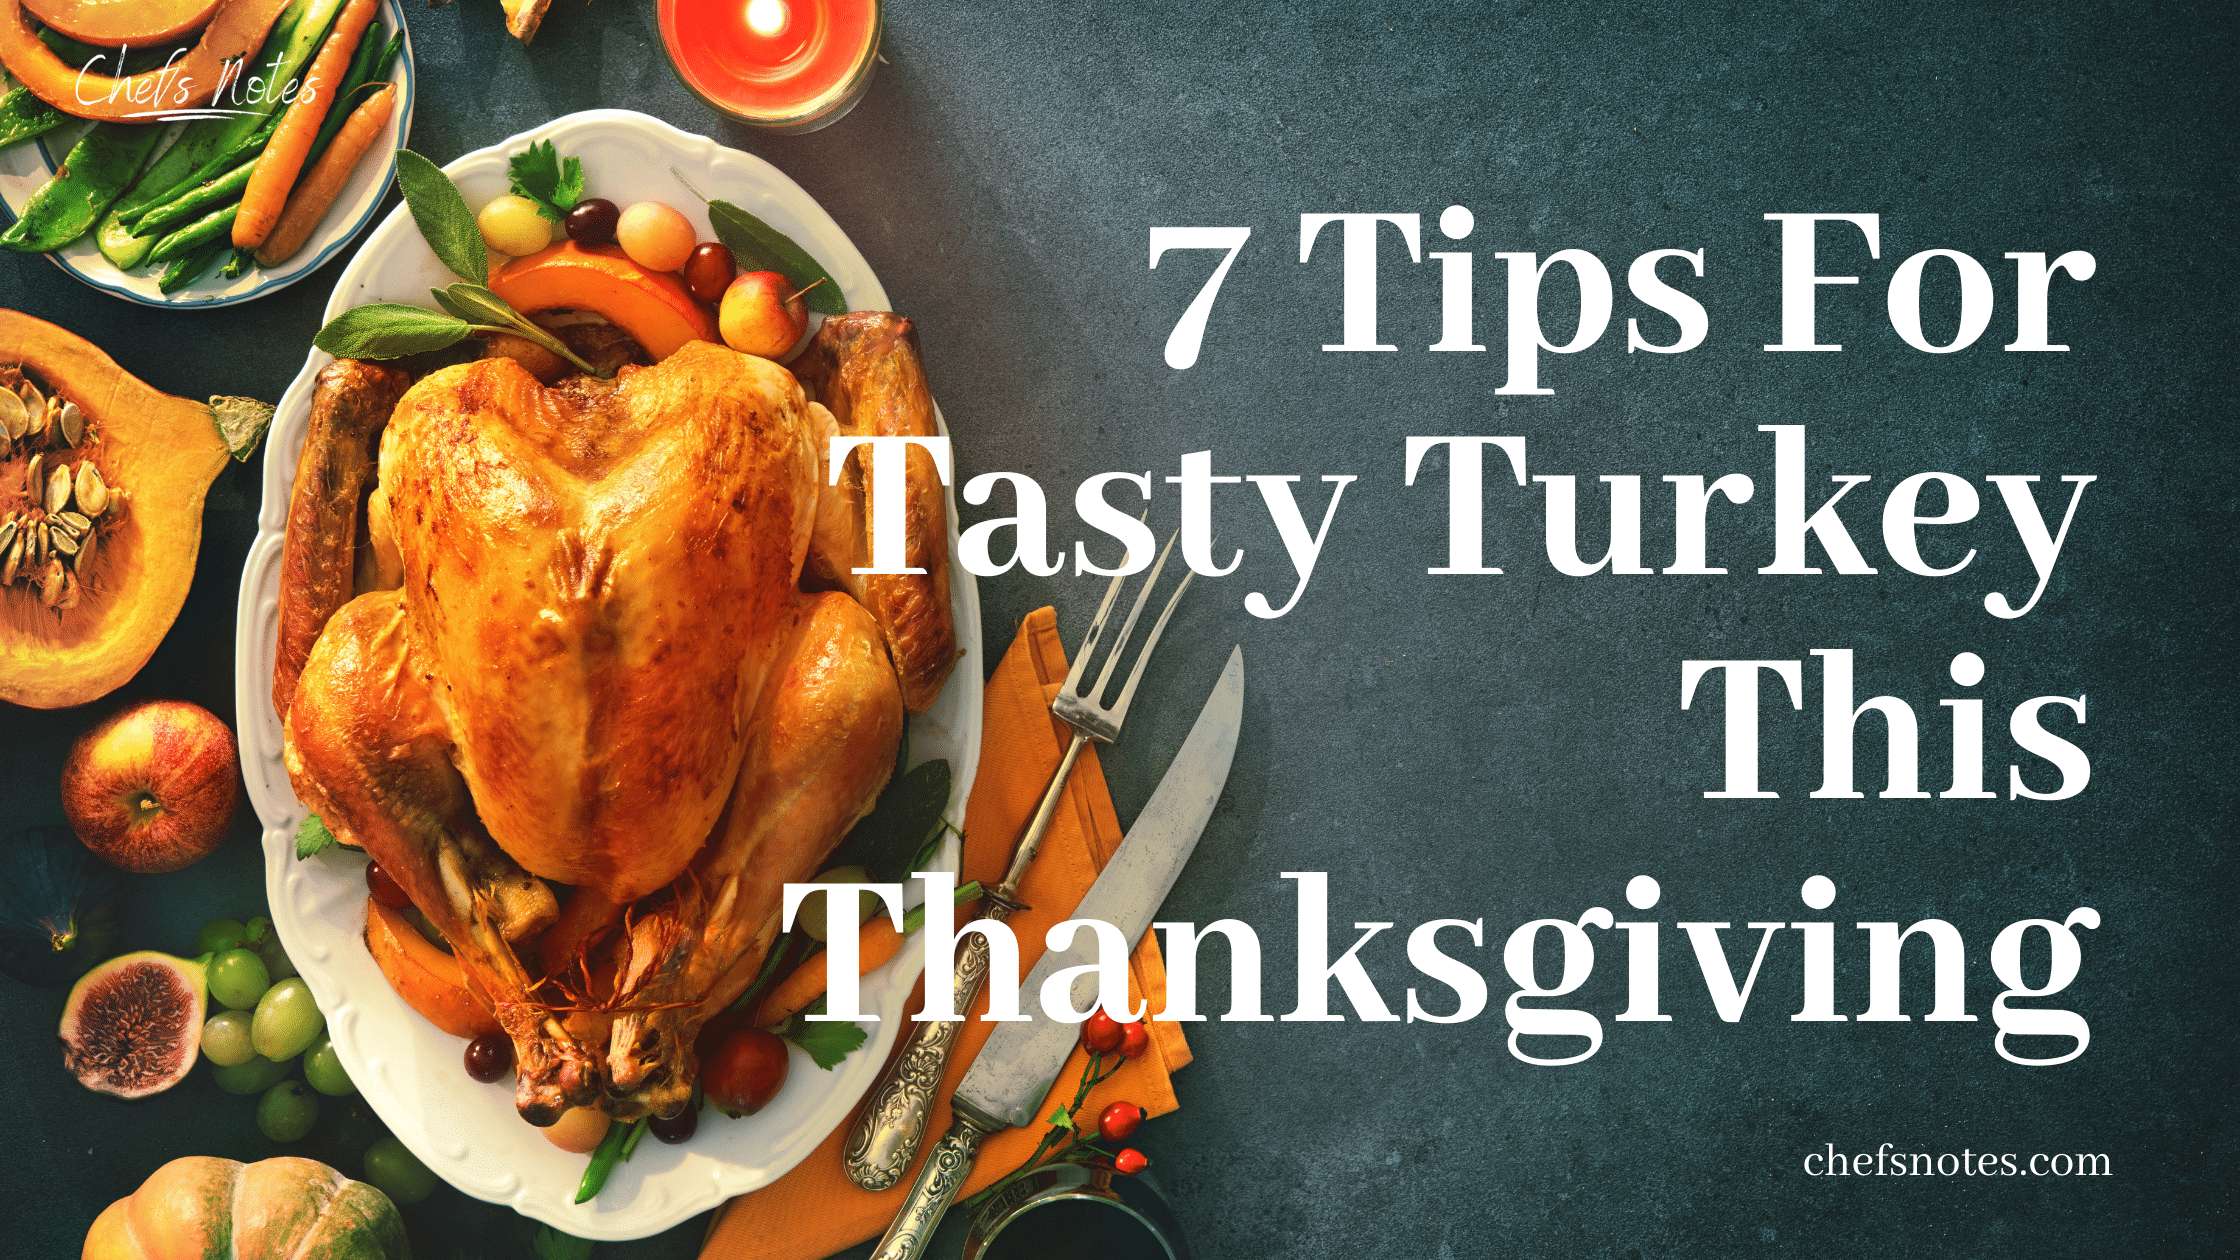 7 Turkey Cooking Tips For This Thanksgiving – Chefs Notes